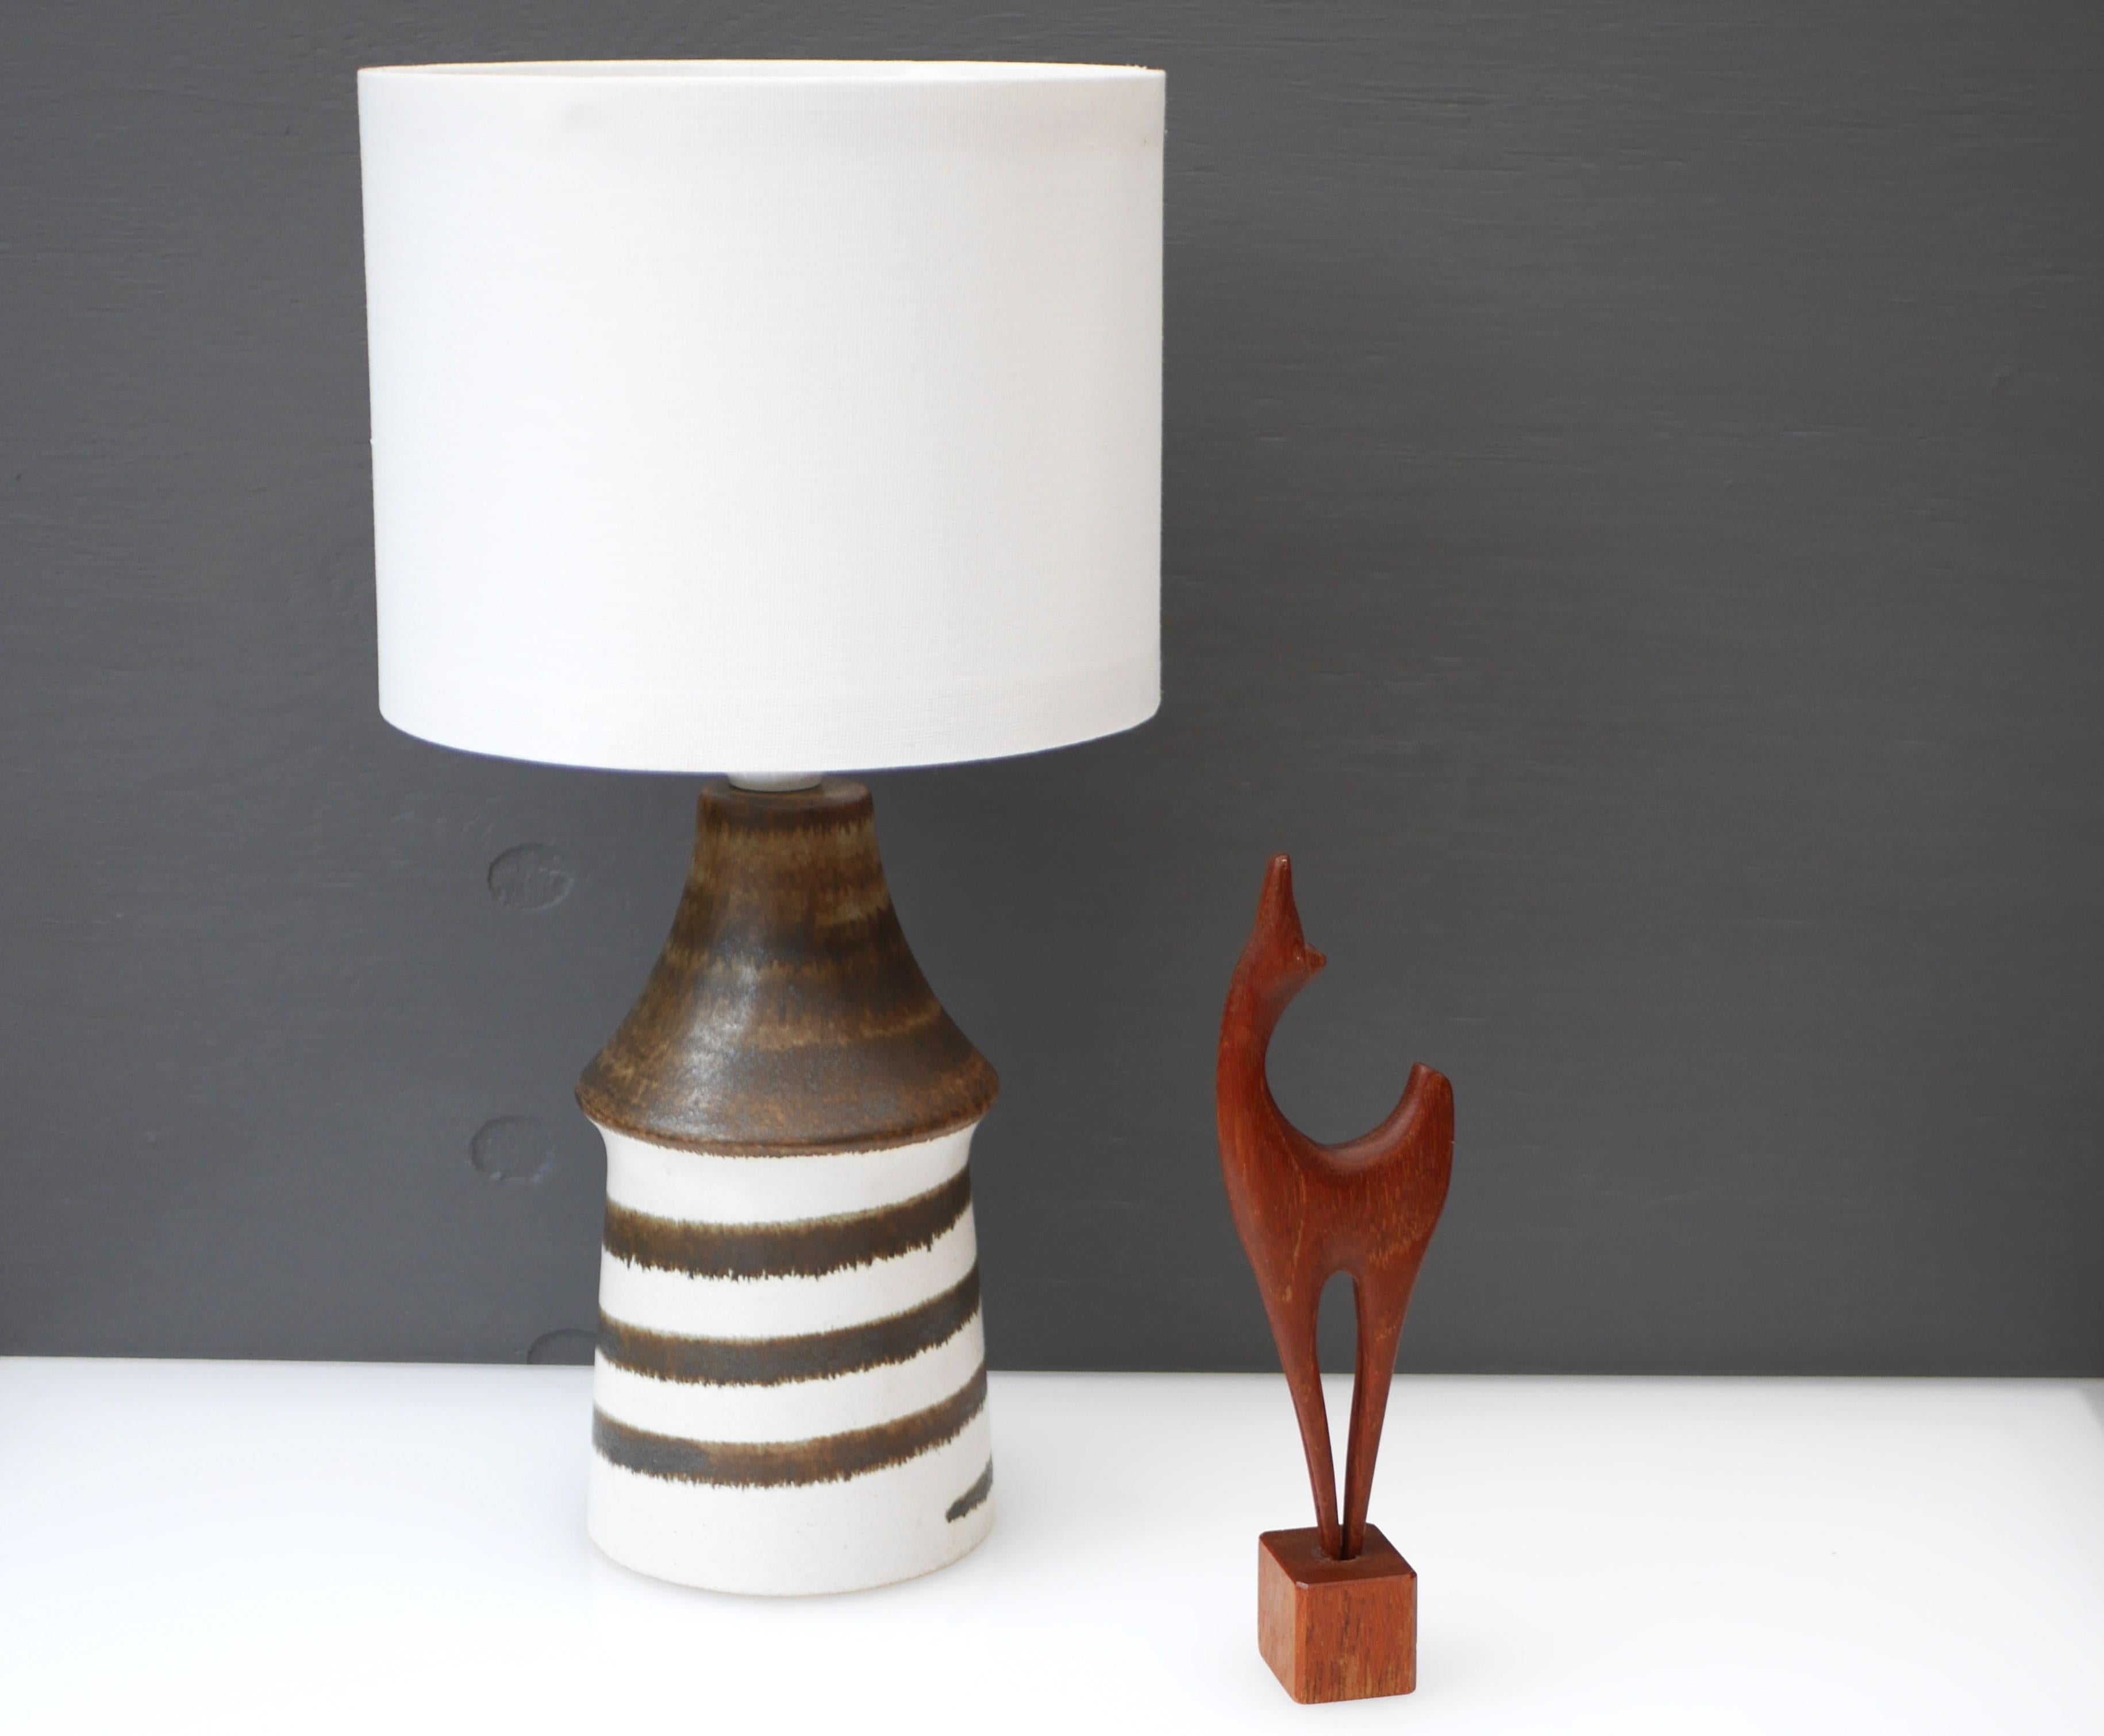 Hand-Crafted Mid-century modern pottery table lamp by Bruno Karlsson, EGO, Sweden.  For Sale